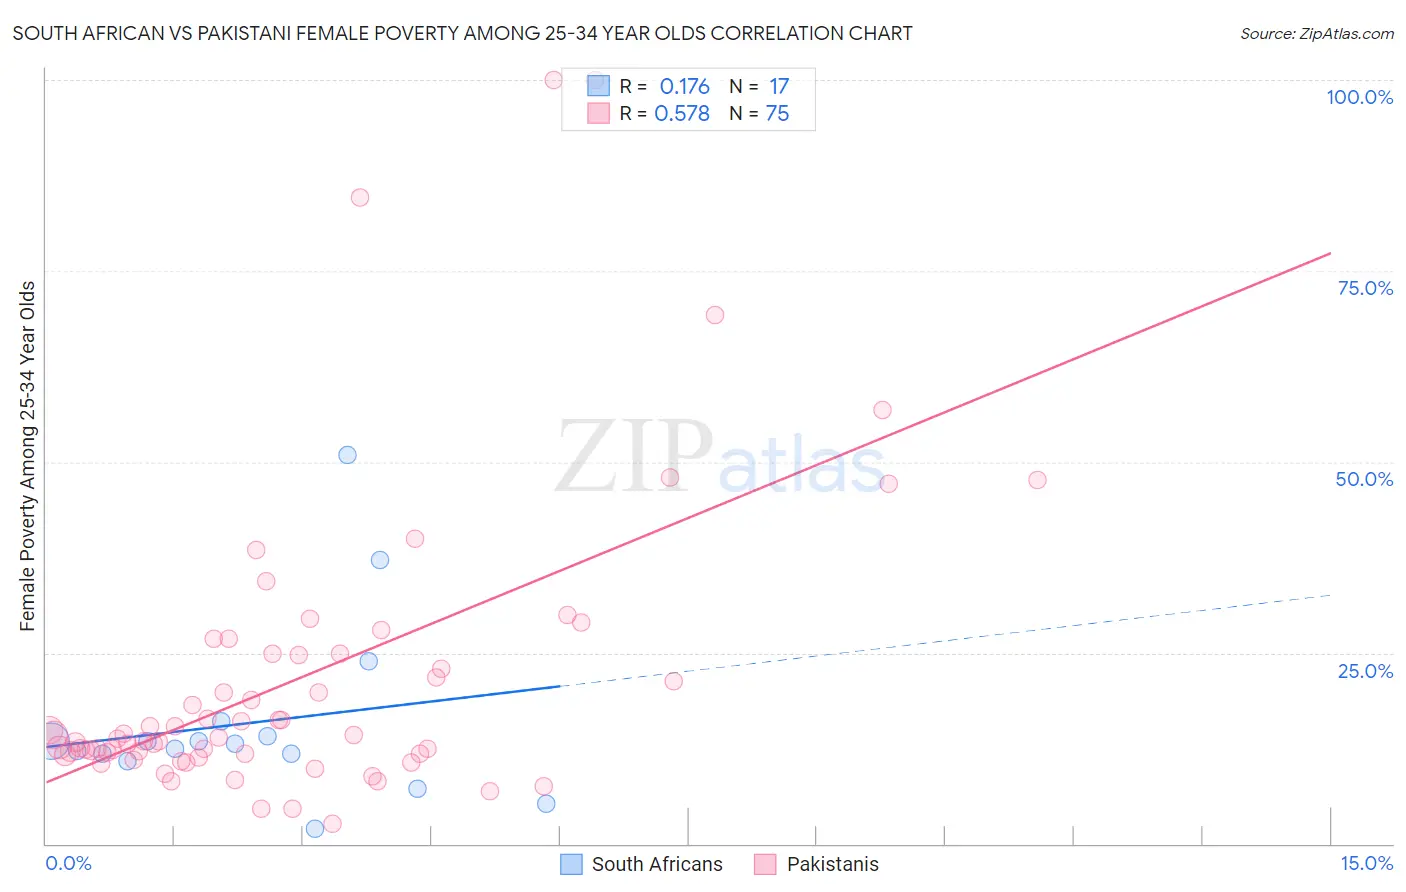 South African vs Pakistani Female Poverty Among 25-34 Year Olds